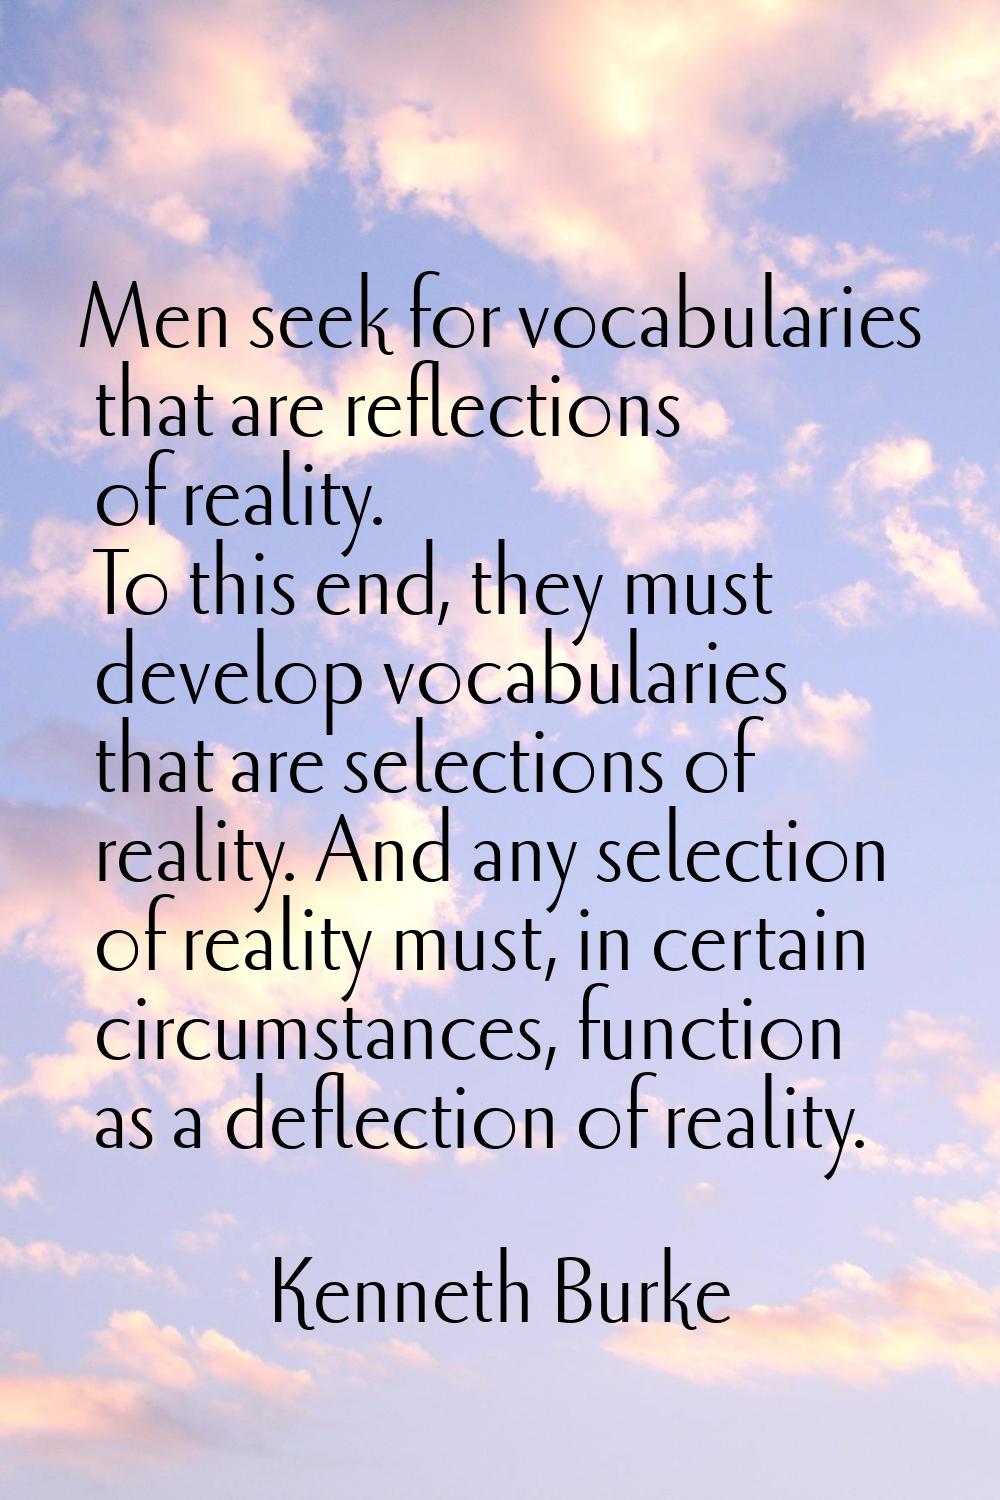 Men seek for vocabularies that are reflections of reality. To this end, they must develop vocabular